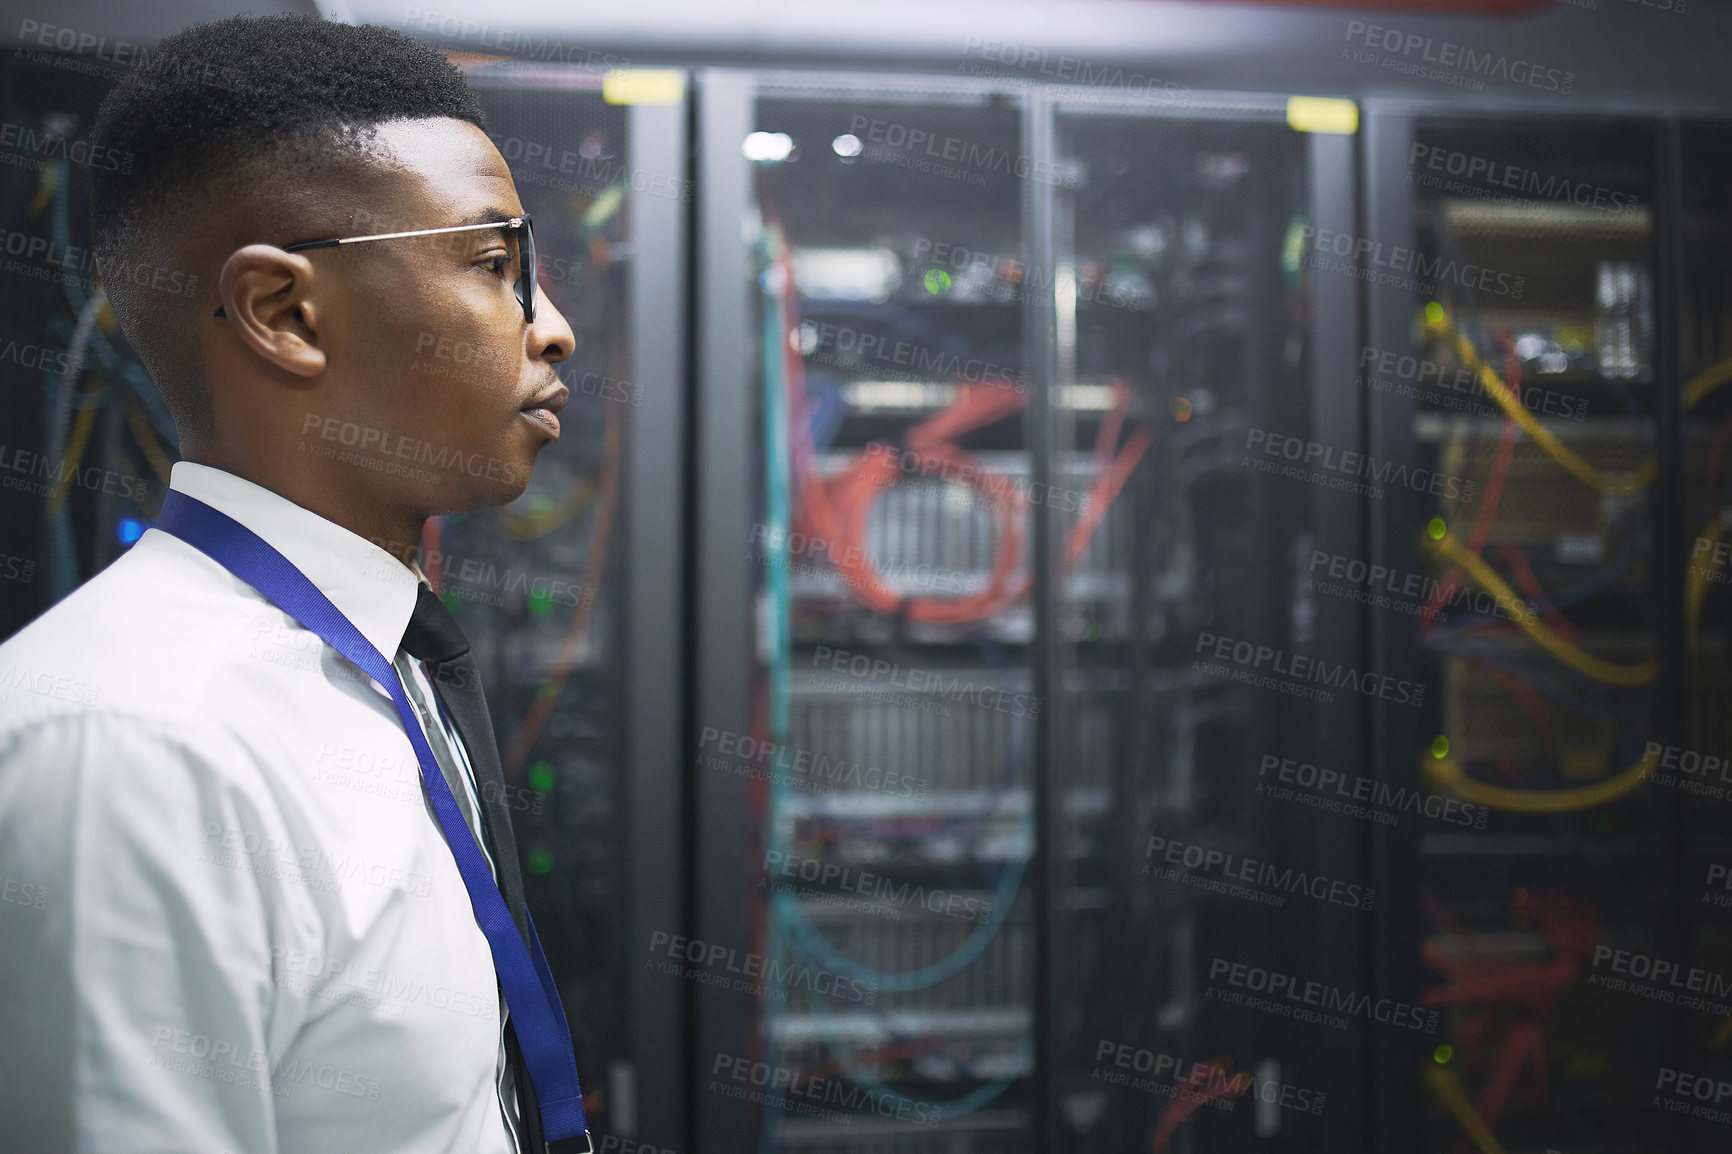 Buy stock photo Shot of a young male IT technician in a server room